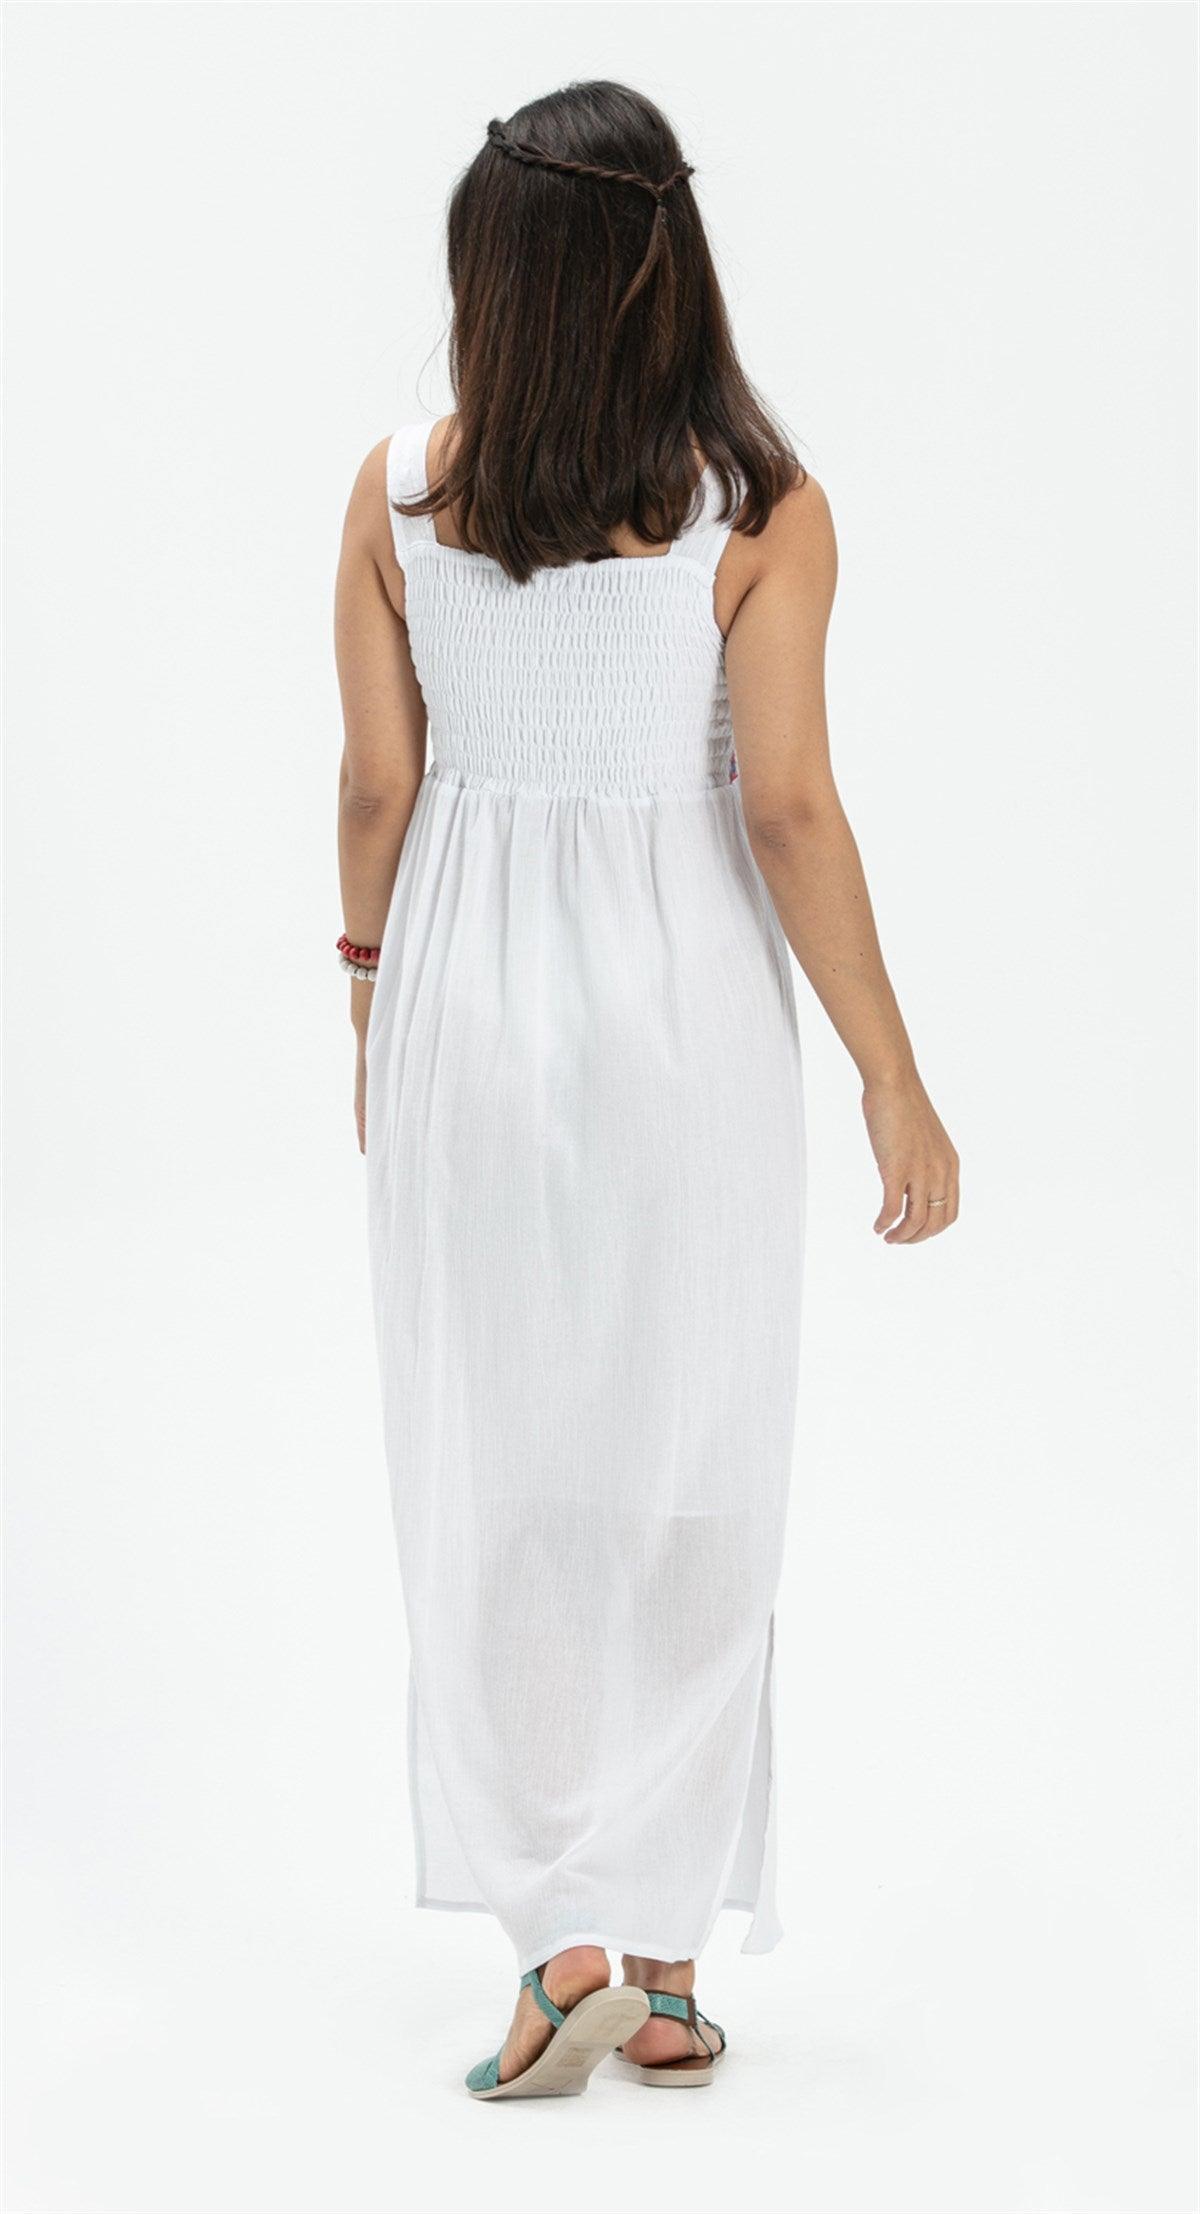 Strappy Ethnic Embroidered White Long Dress - trendynow